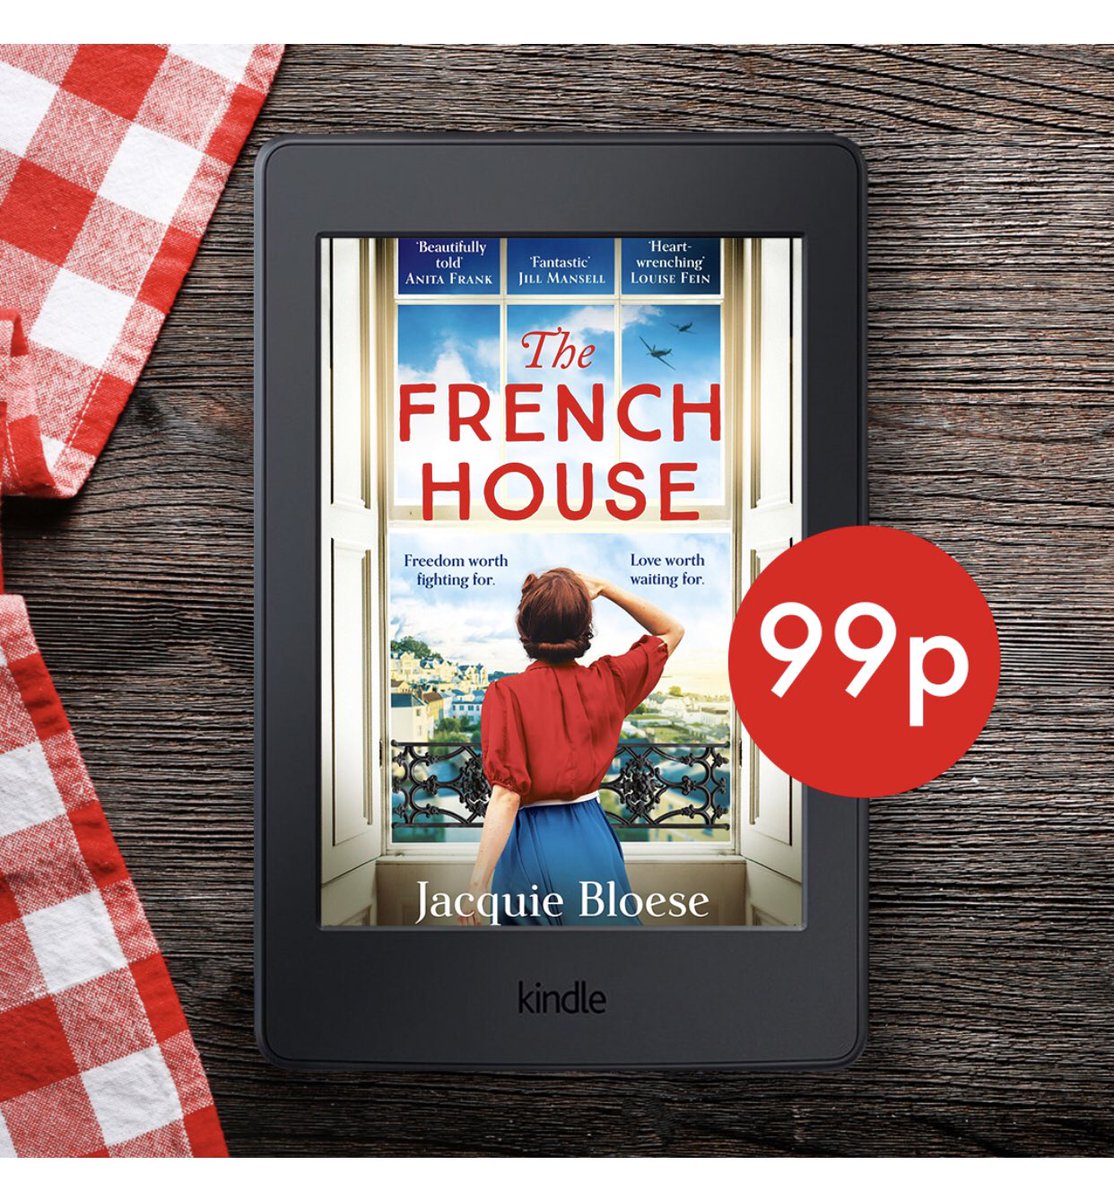 🤖If AI says it, who am I to argue 😂”Customers describe the content as captivating, moving and gripping” 🙏🤖 The French House ebook still cheaper than chips 🍟 on Amazon all April. ⬇️@HodderBooks Deal: amzn.eu/d/9vgwckk